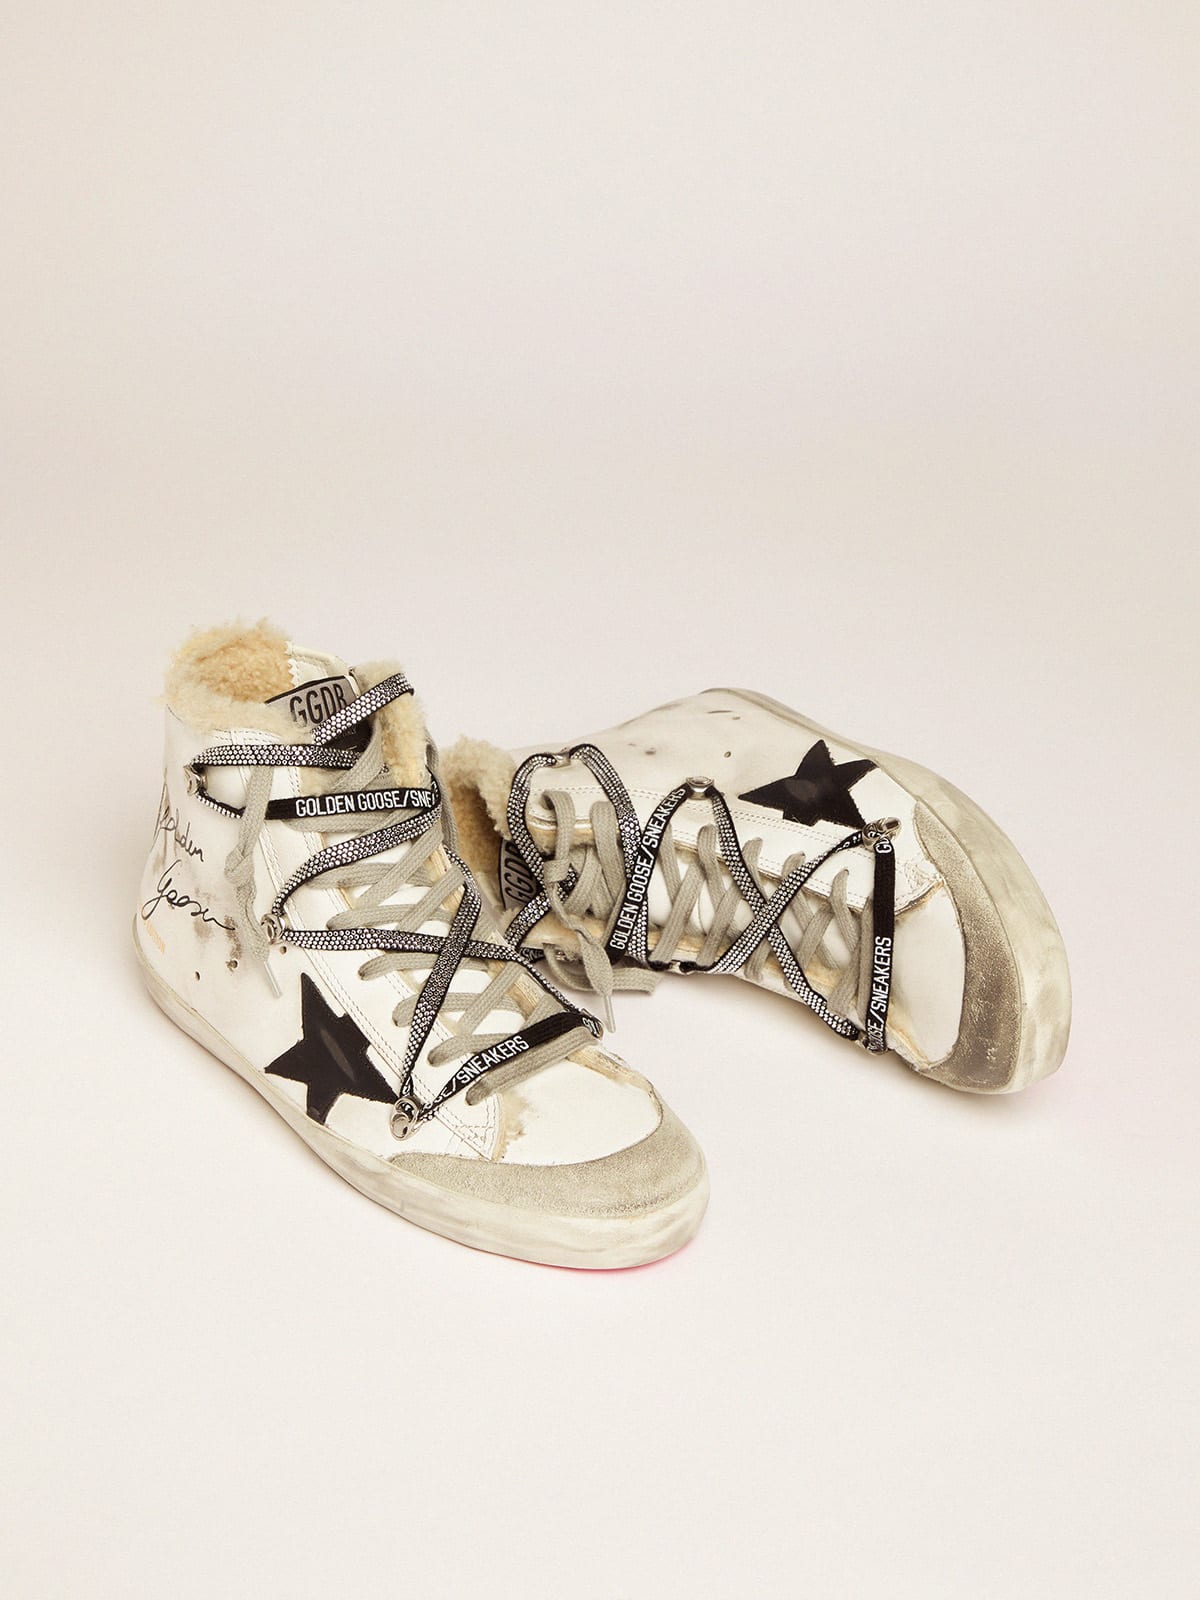 Golden Goose - Women’s Francy Penstar LAB sneakers with shearling inserts and black star in 